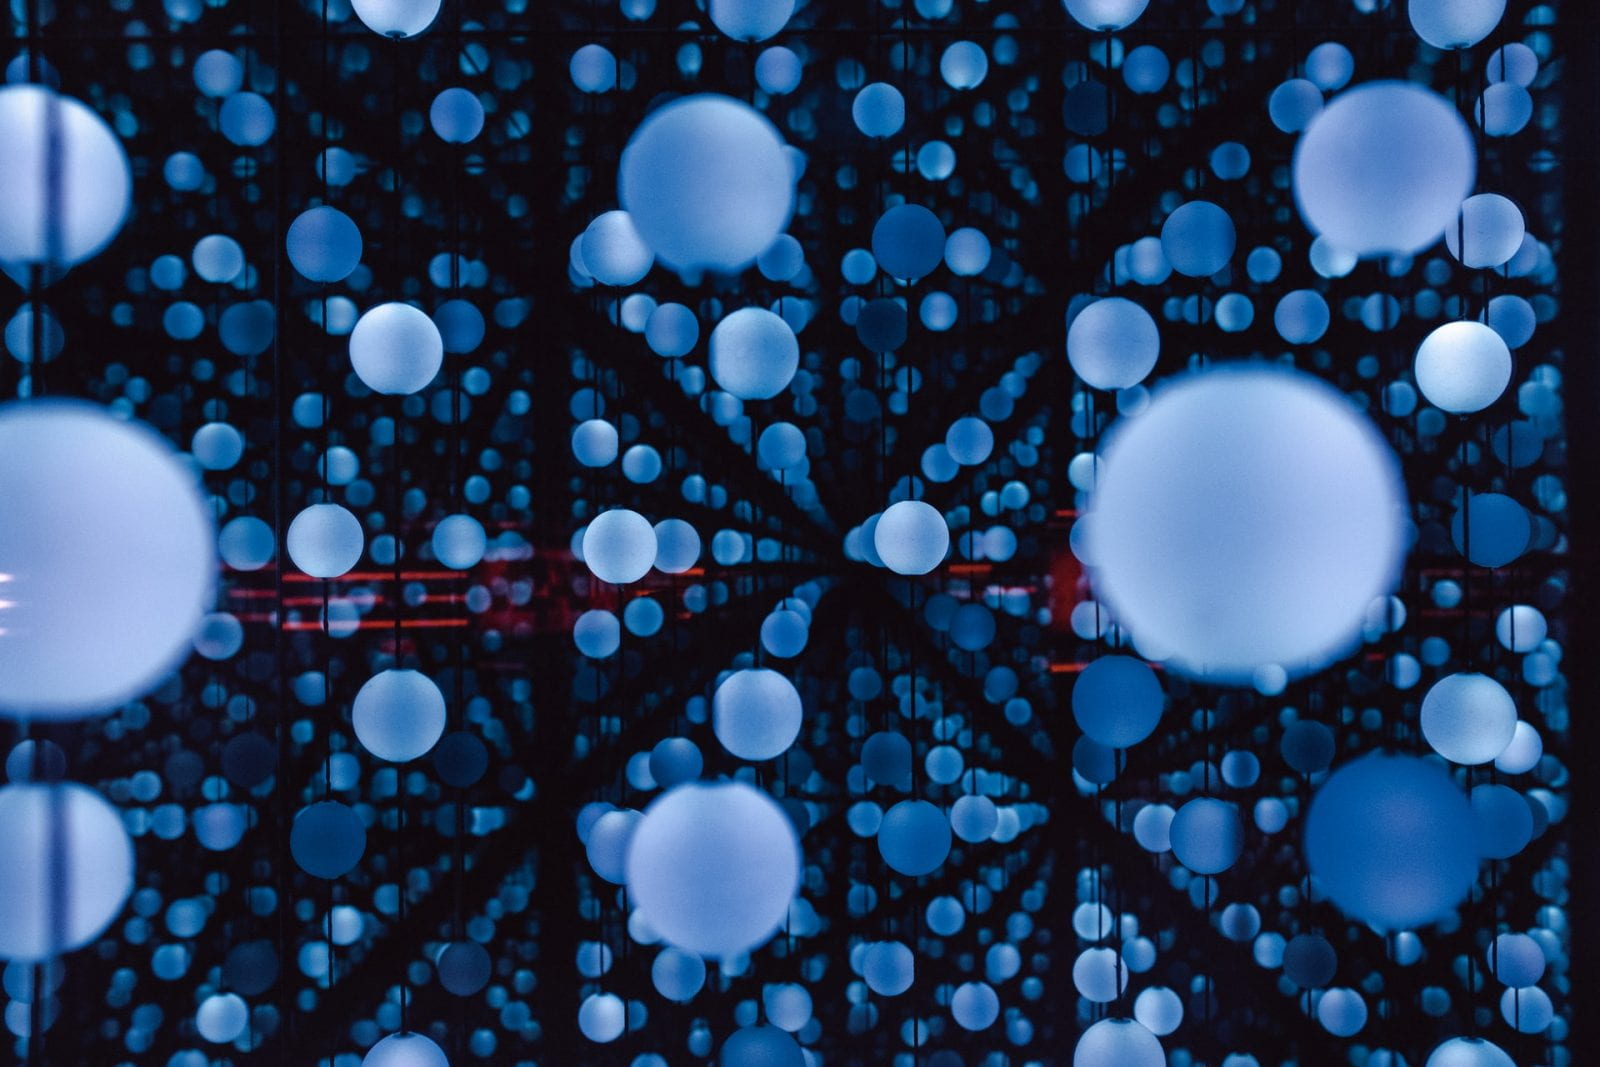 Abstract art of blue spheres on a black backdrop with distant red lines.